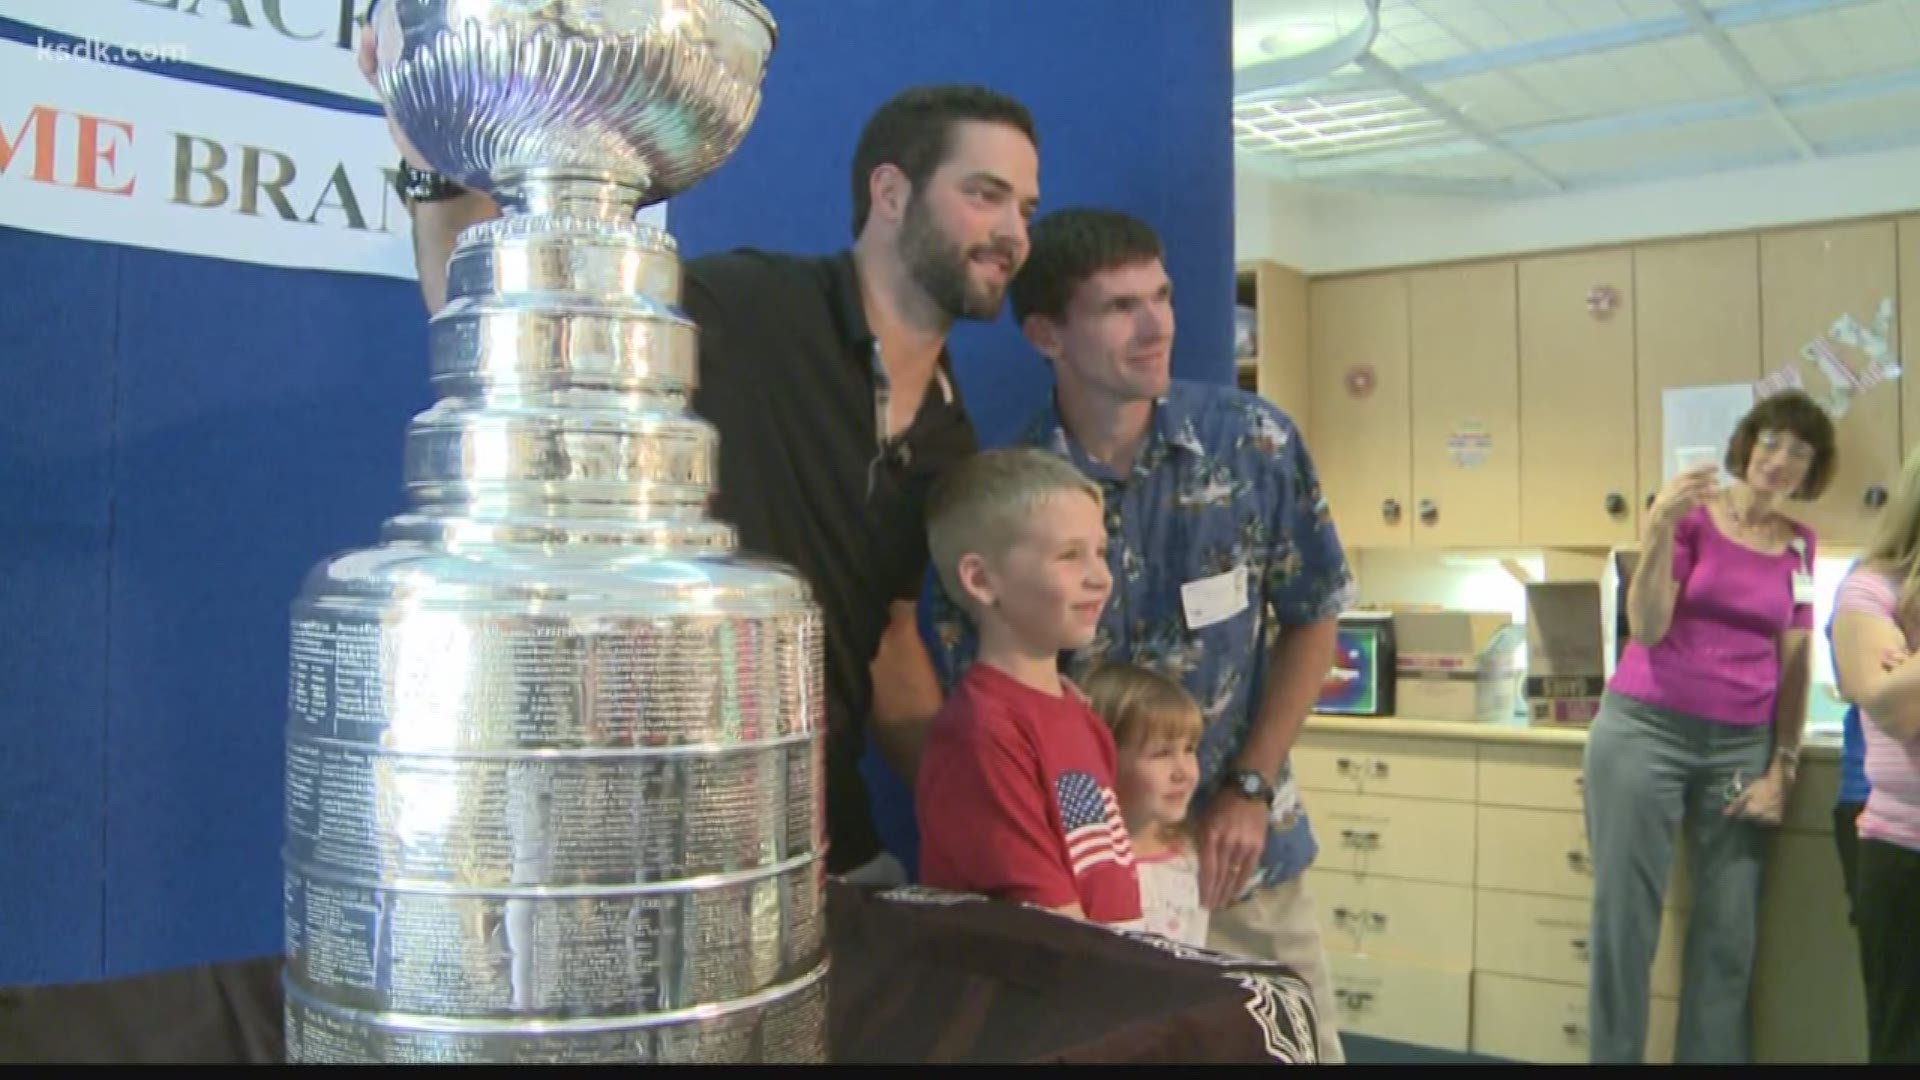 Brandon Bollig is the first St. Louis native to win the Stanley Cup. He won in 2013 when he was on the Chicago Blackhawks. Oddly enough, they beat the Boston Bruins that year. But Bollig grew up a Blues fan.